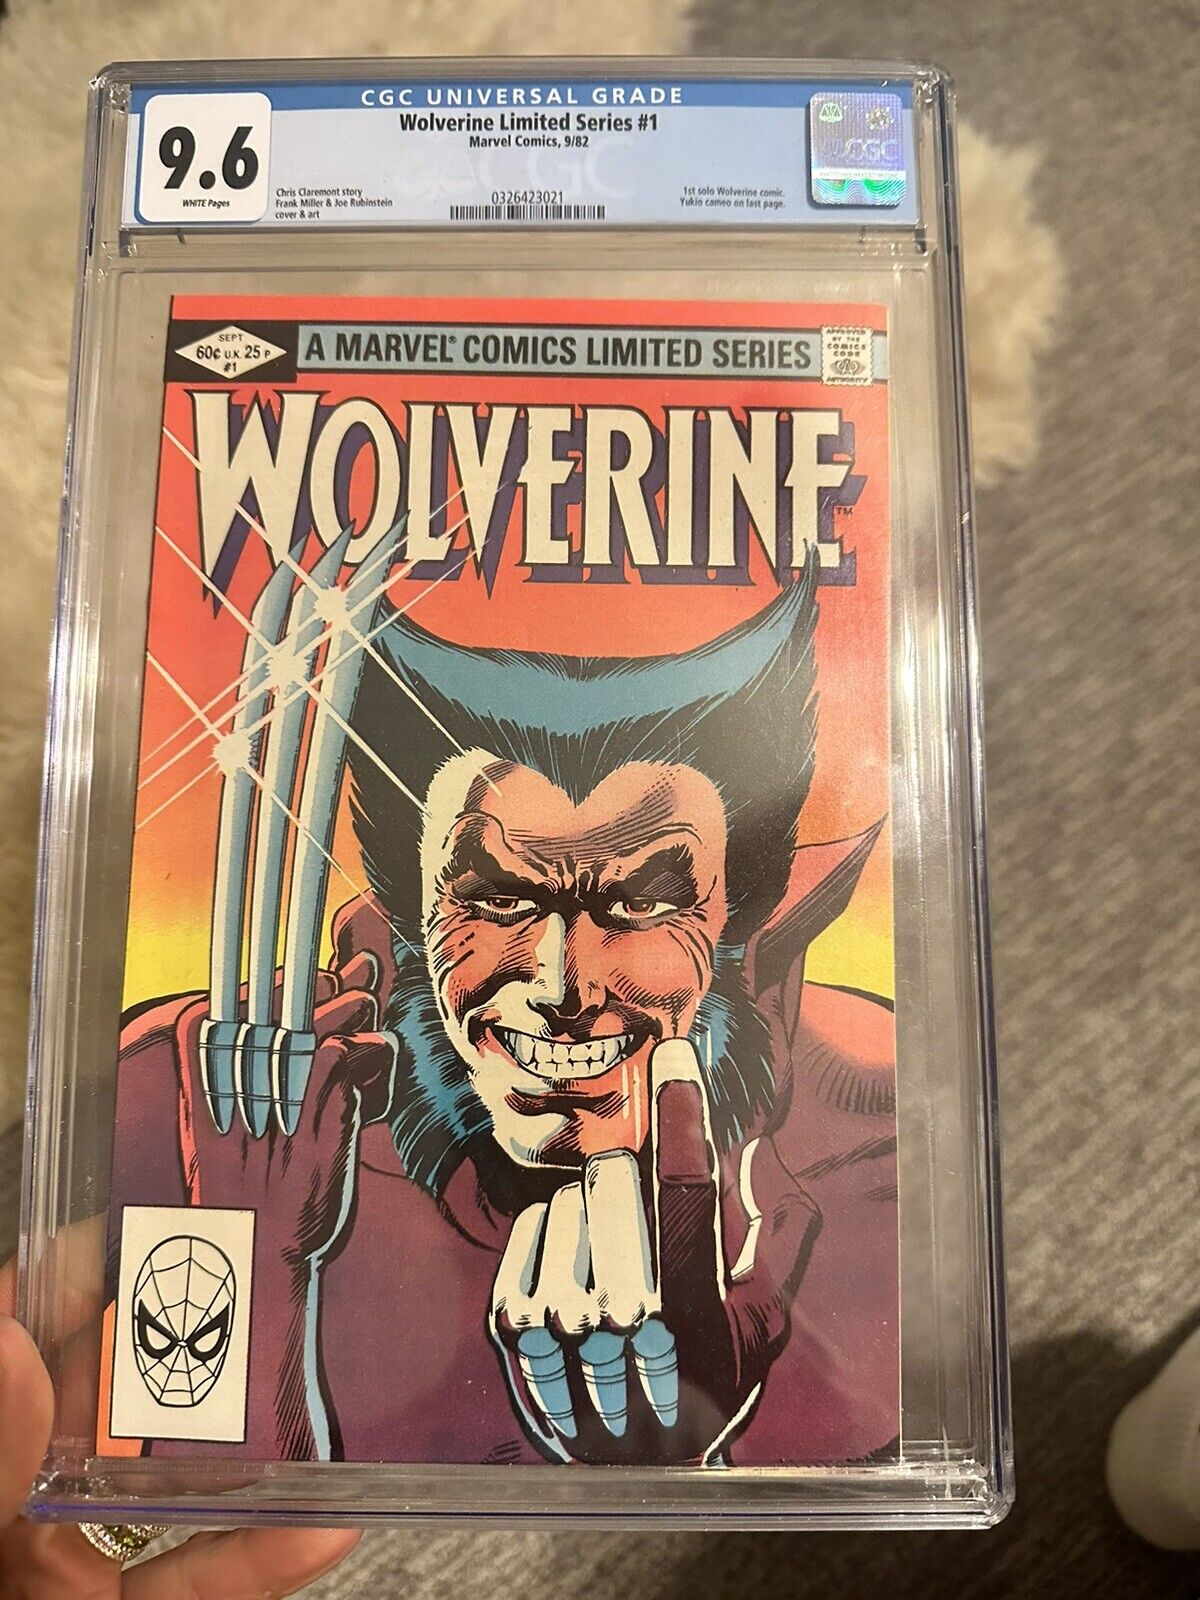 Wolverine Limited Series #1 CGC 9.6 Near Mint+ 1982 White Pages